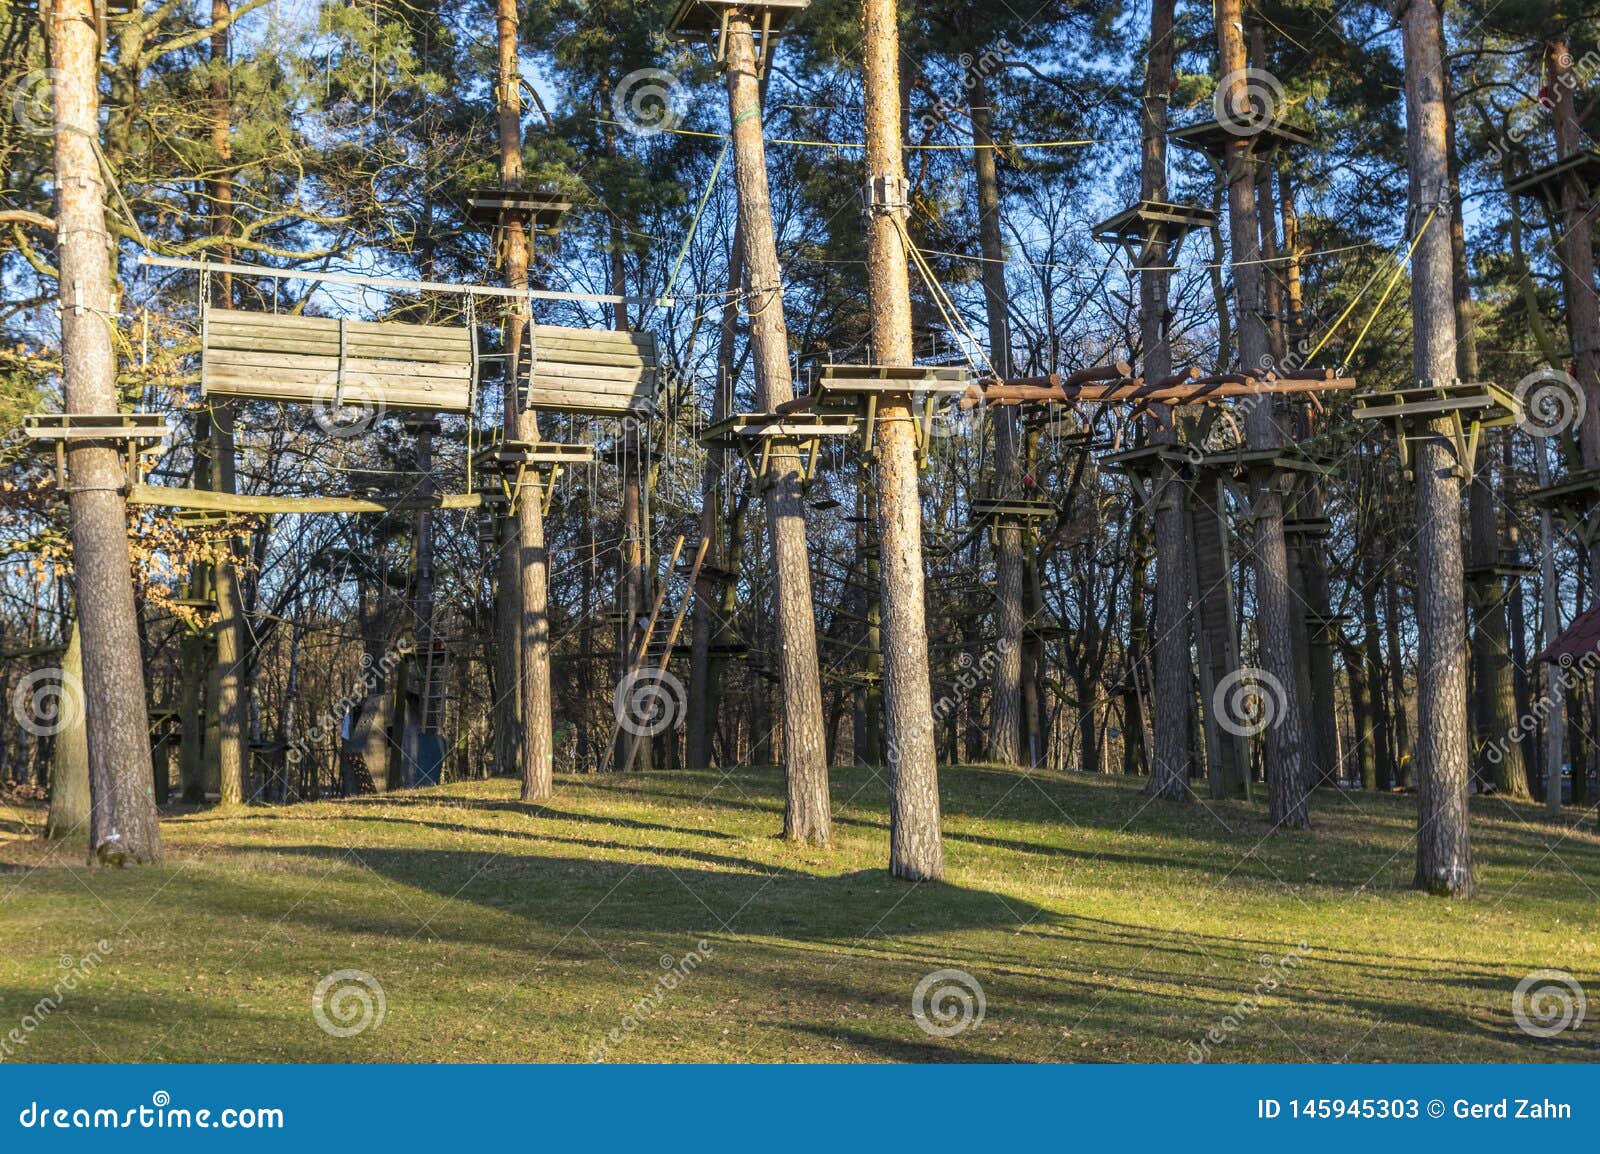 Climbing Garden, High Ropes Course in the Forest with Various